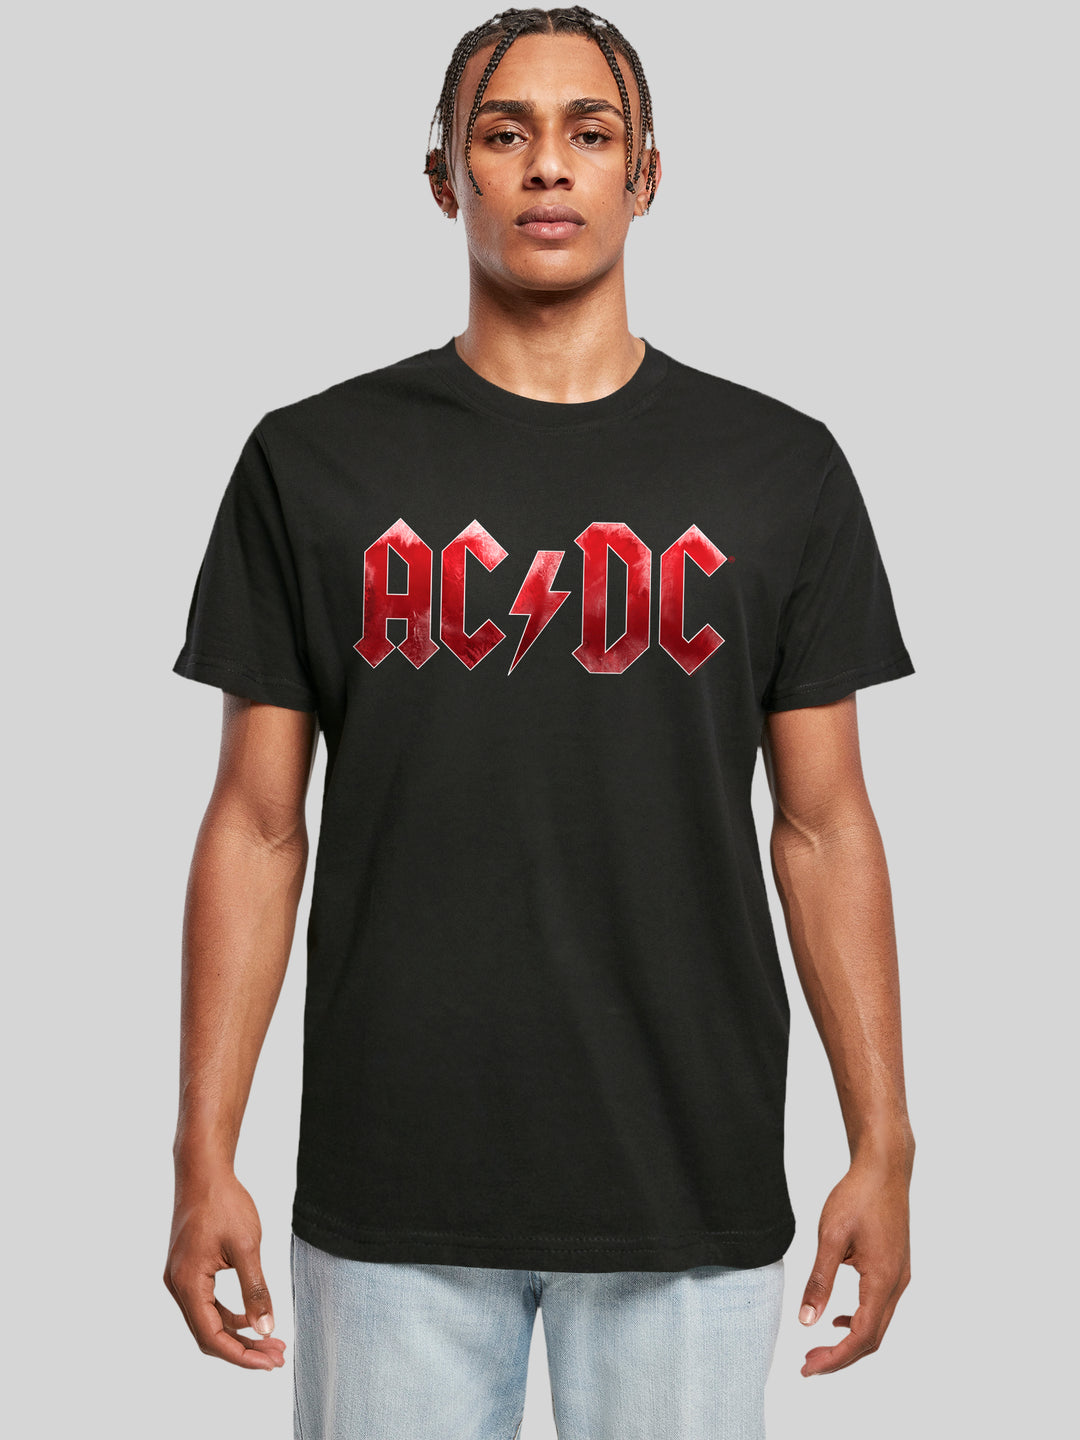 ACDC Red Ice Logo with T-Shirt Round Neck